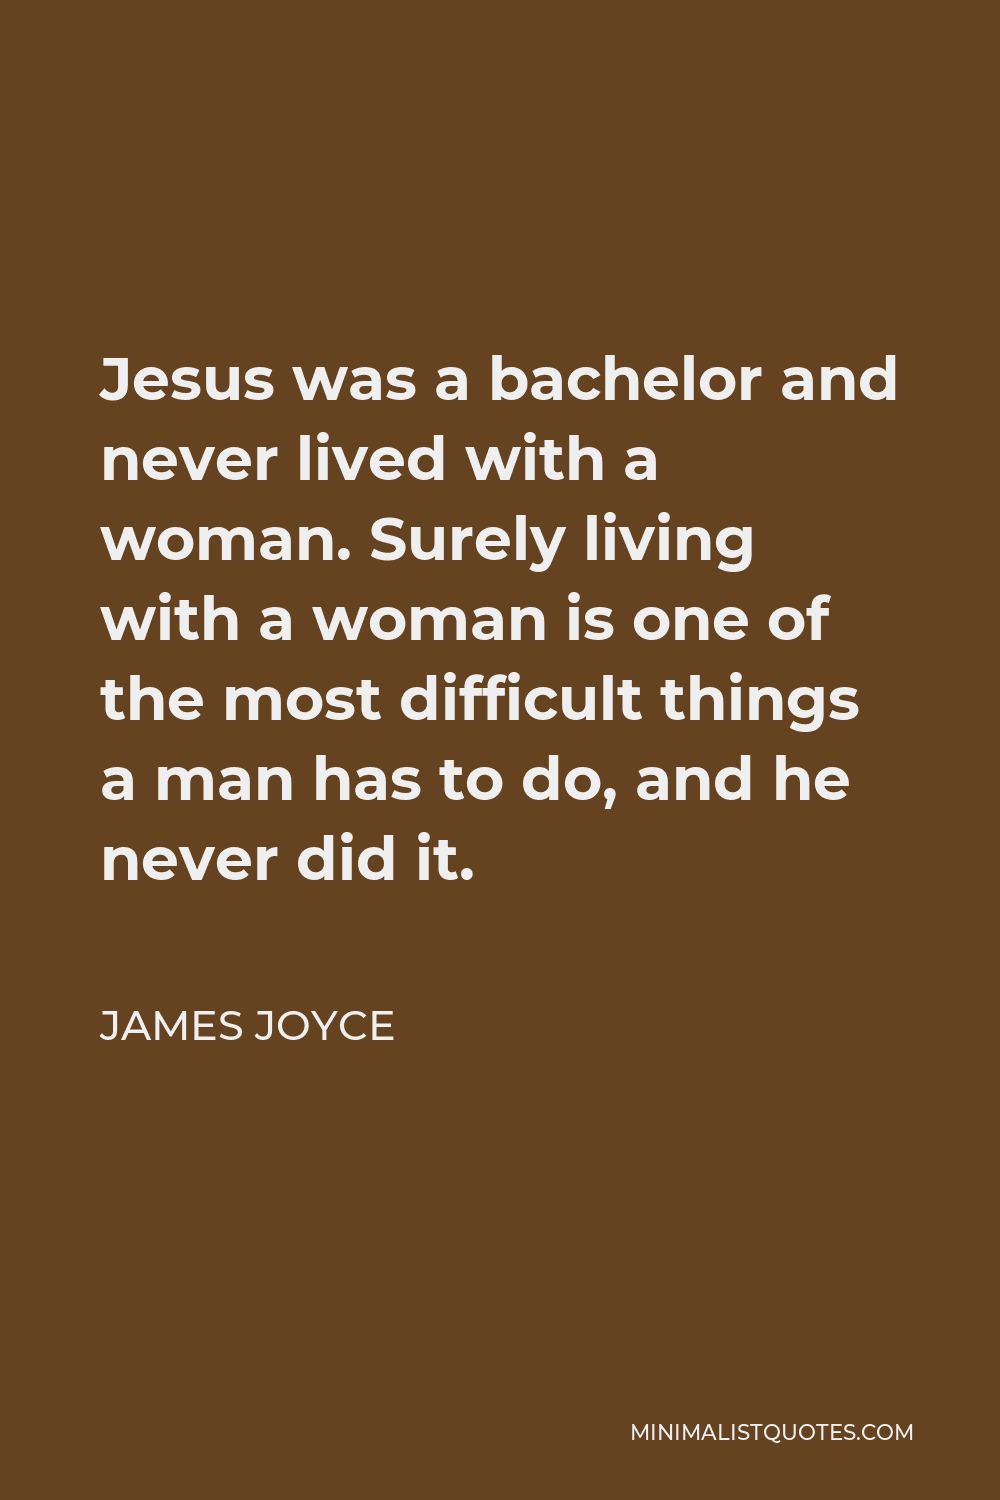 James Joyce Quote - Jesus was a bachelor and never lived with a woman. Surely living with a woman is one of the most difficult things a man has to do, and he never did it.